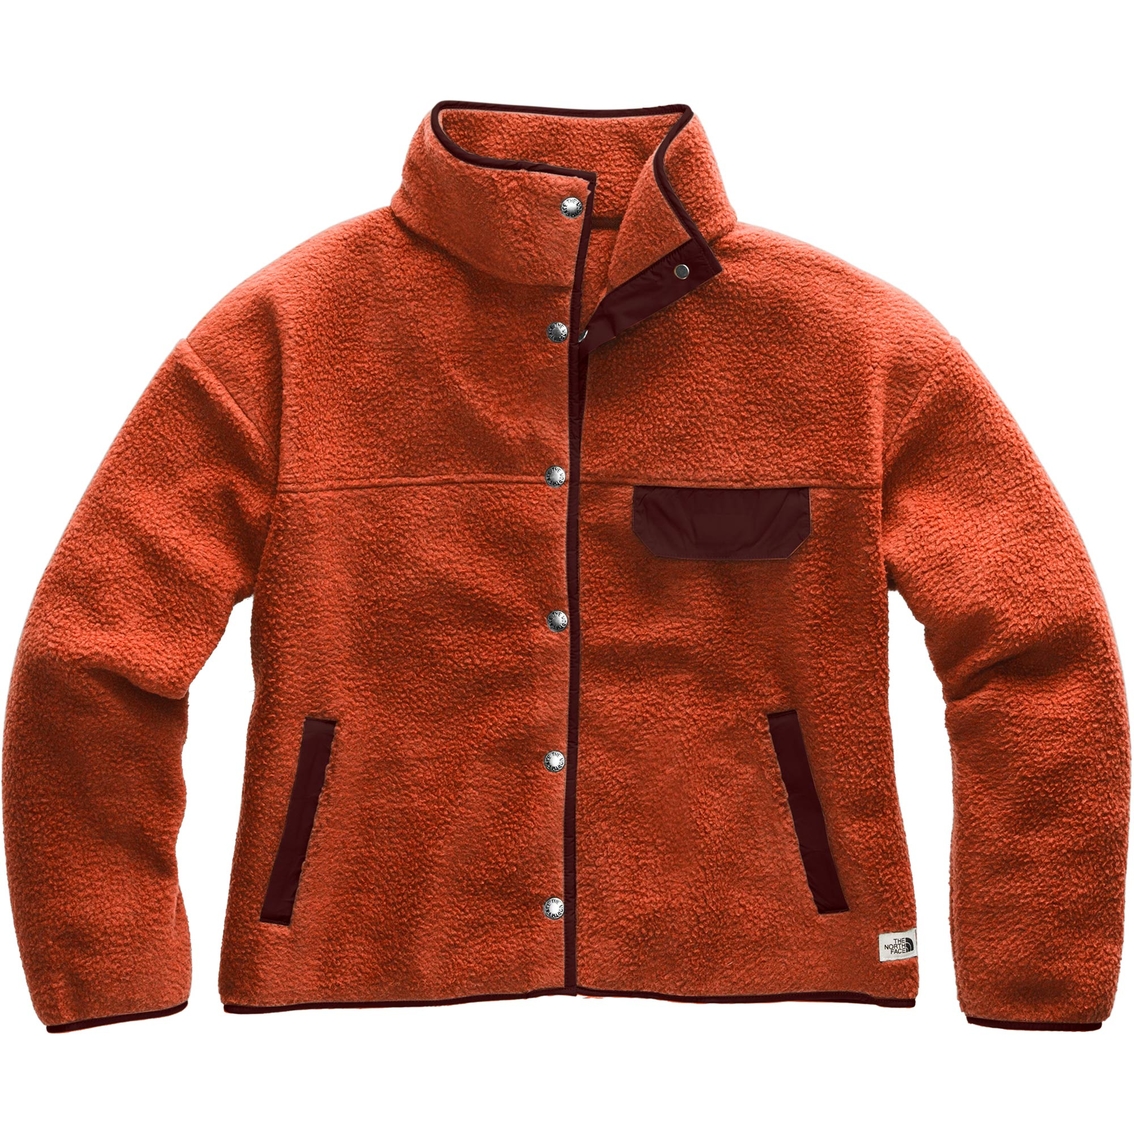 Accessories Jacket North The Jackets Face | Cragmont Clothing | & Fleece Exchange The Shop |